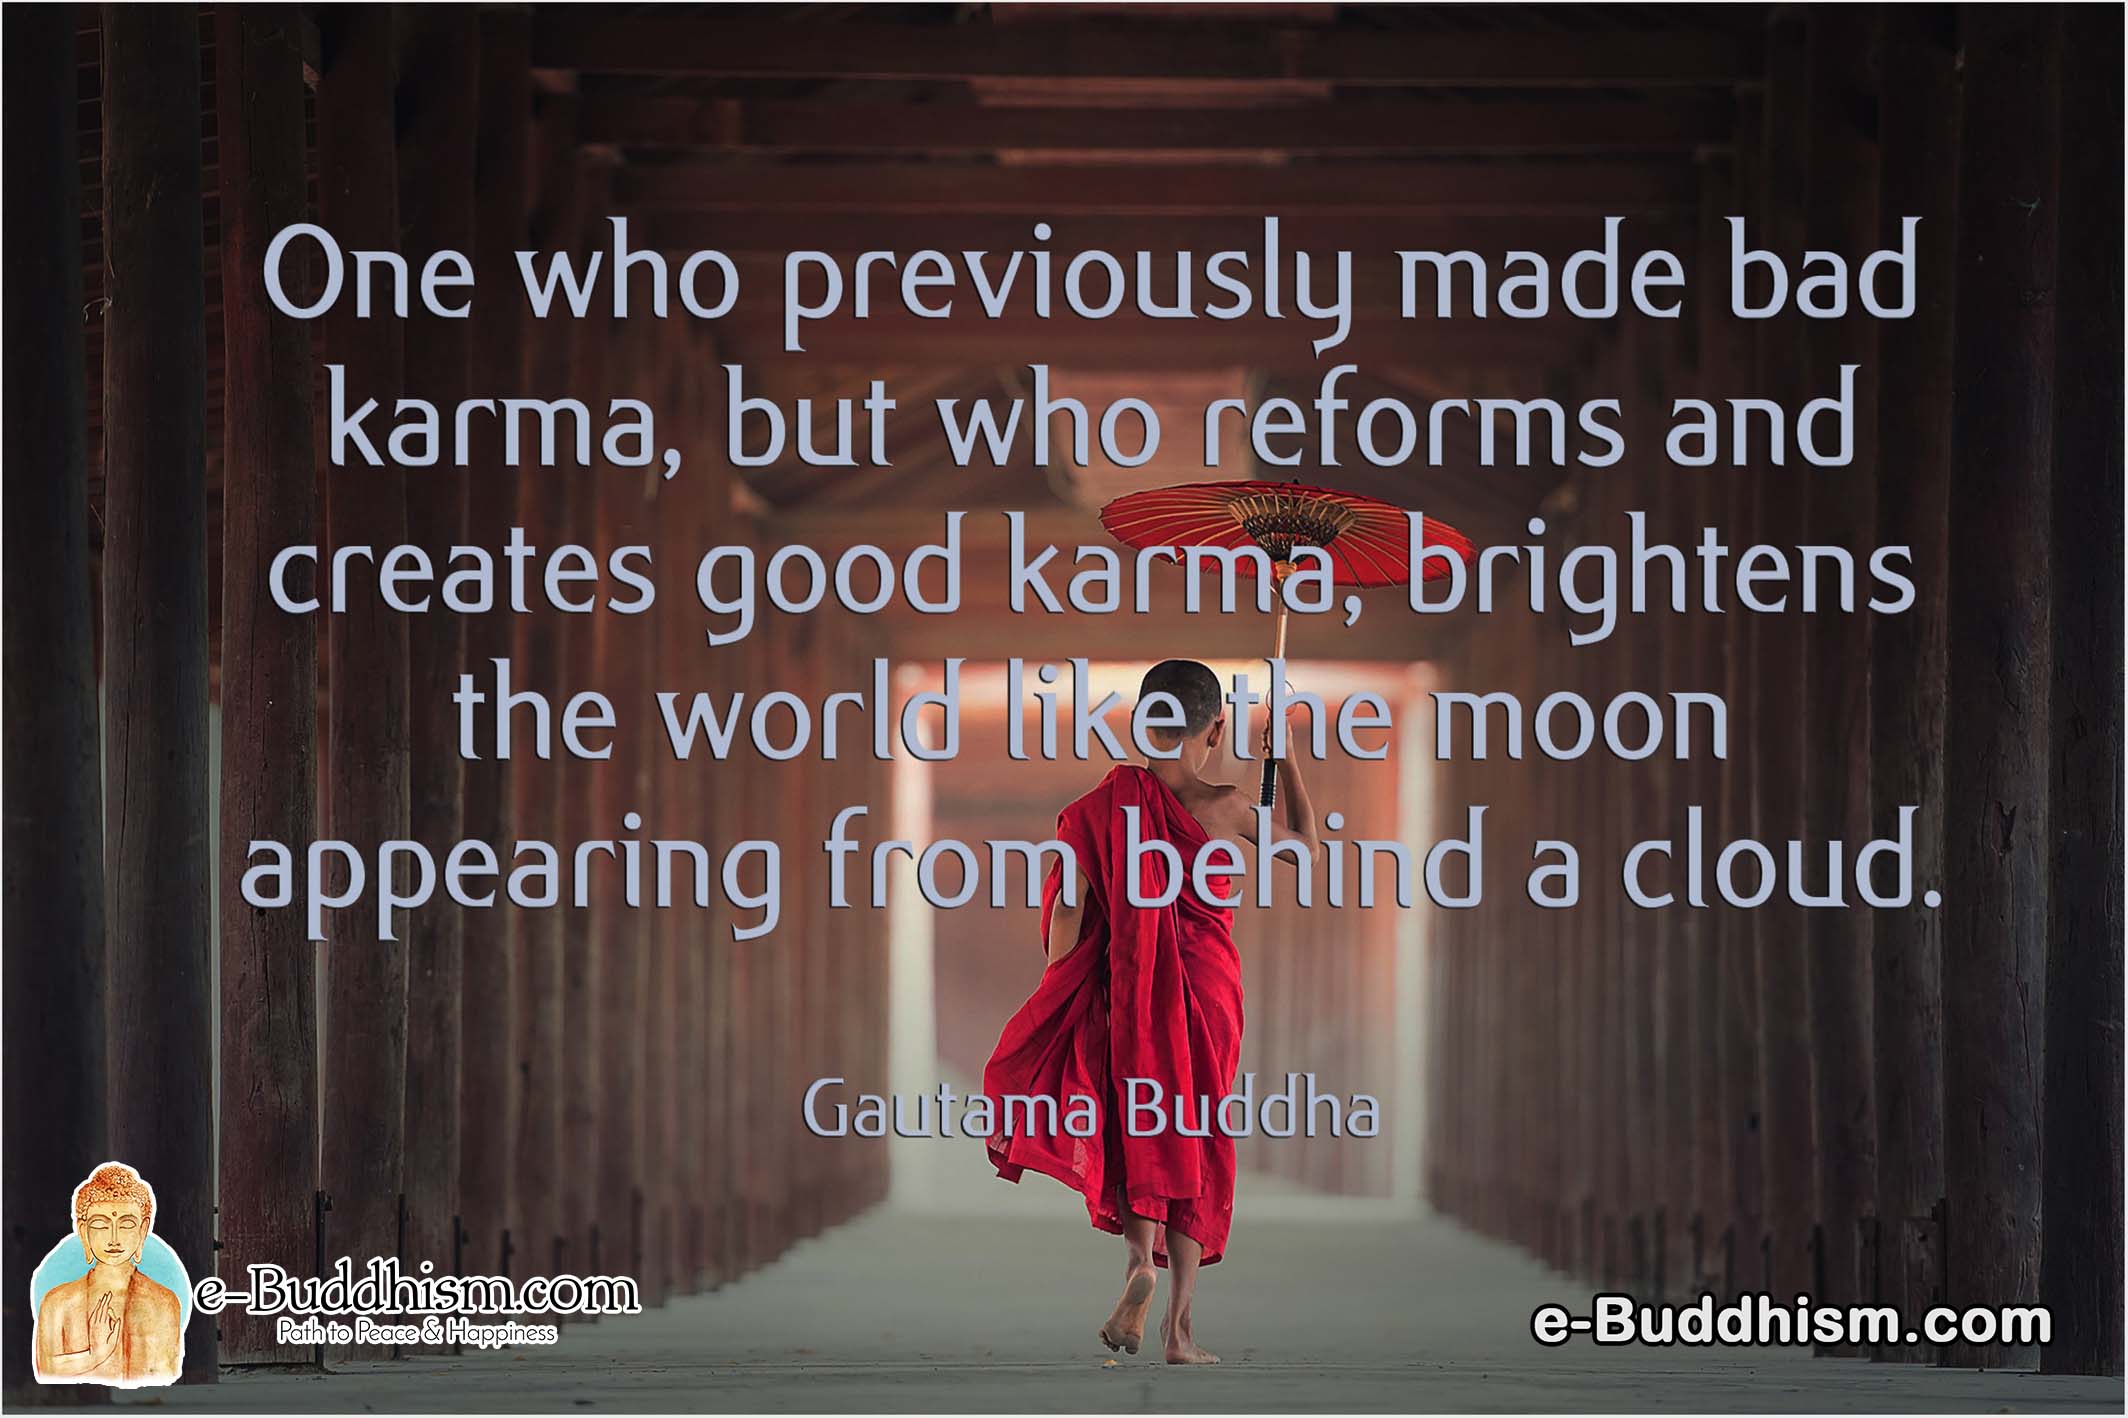 One who previously made bad karma, but who reforms and creates good karma, brightens the world like the moon appearing from behind a cloud. -Buddha